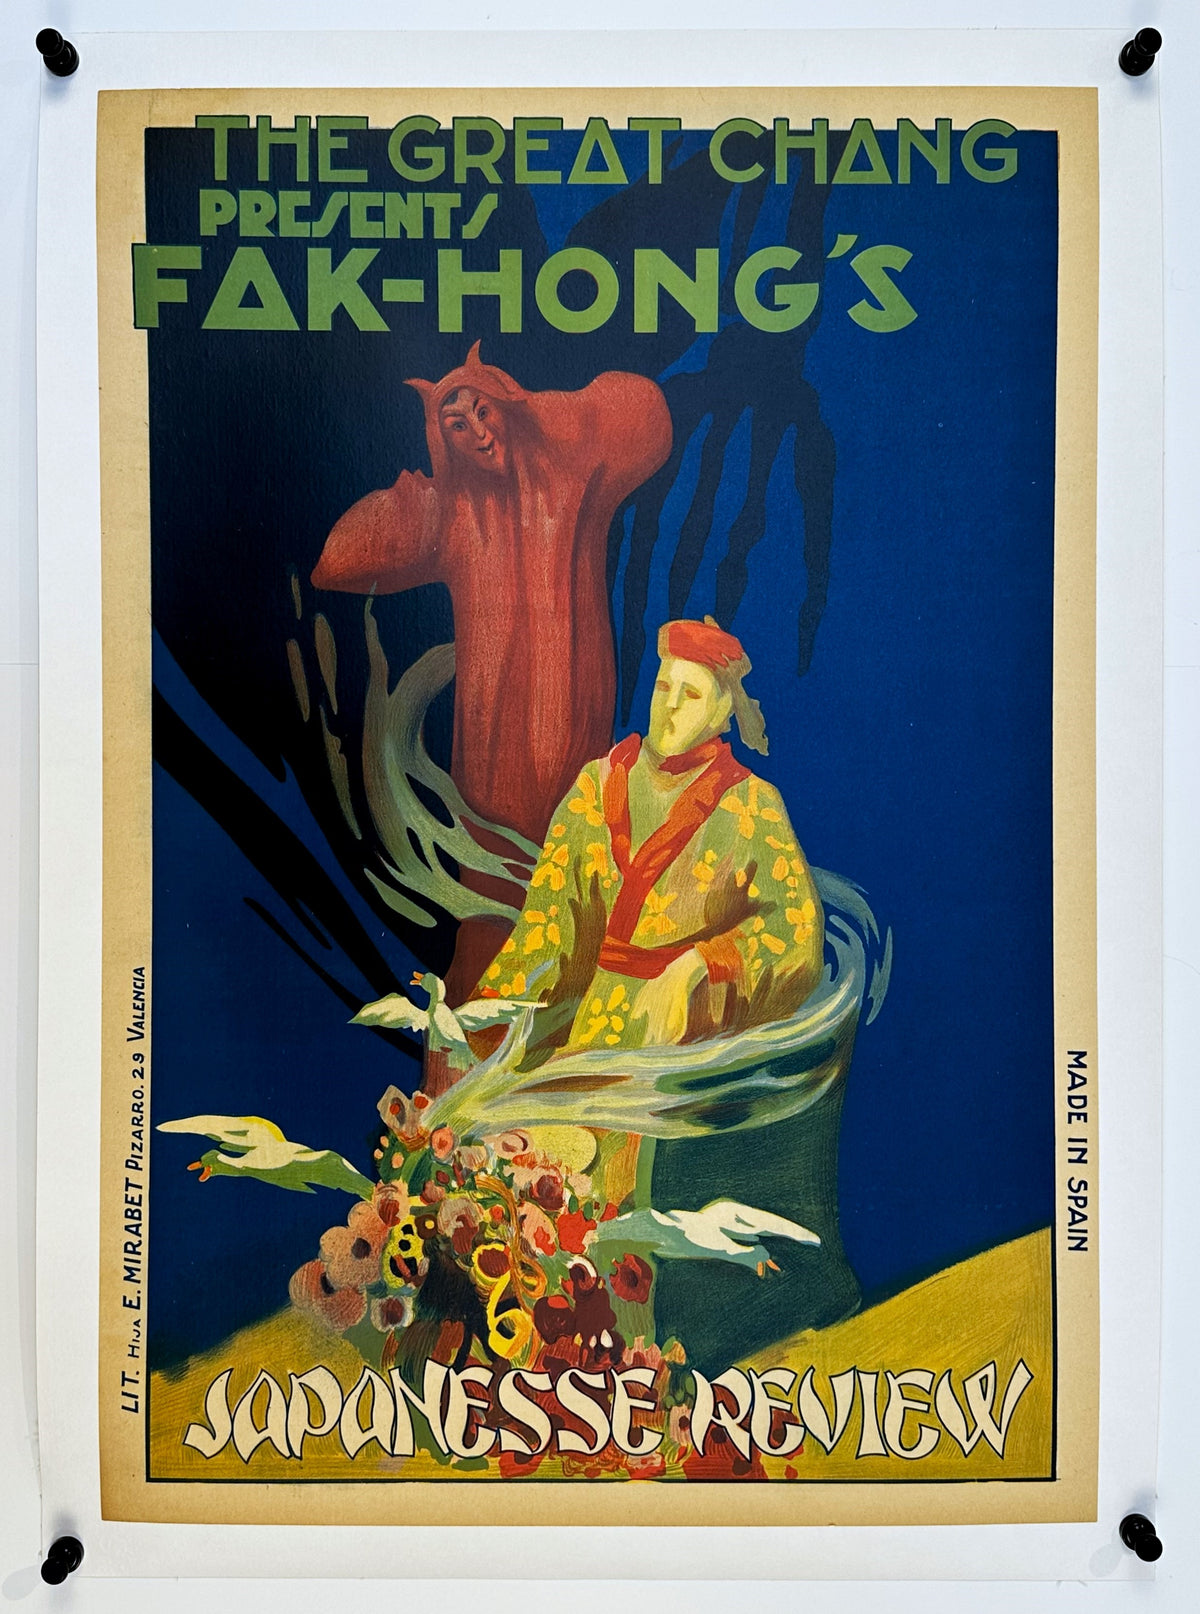 Great Chang &amp; Fak Hong- Japanese Review - Authentic Vintage Poster